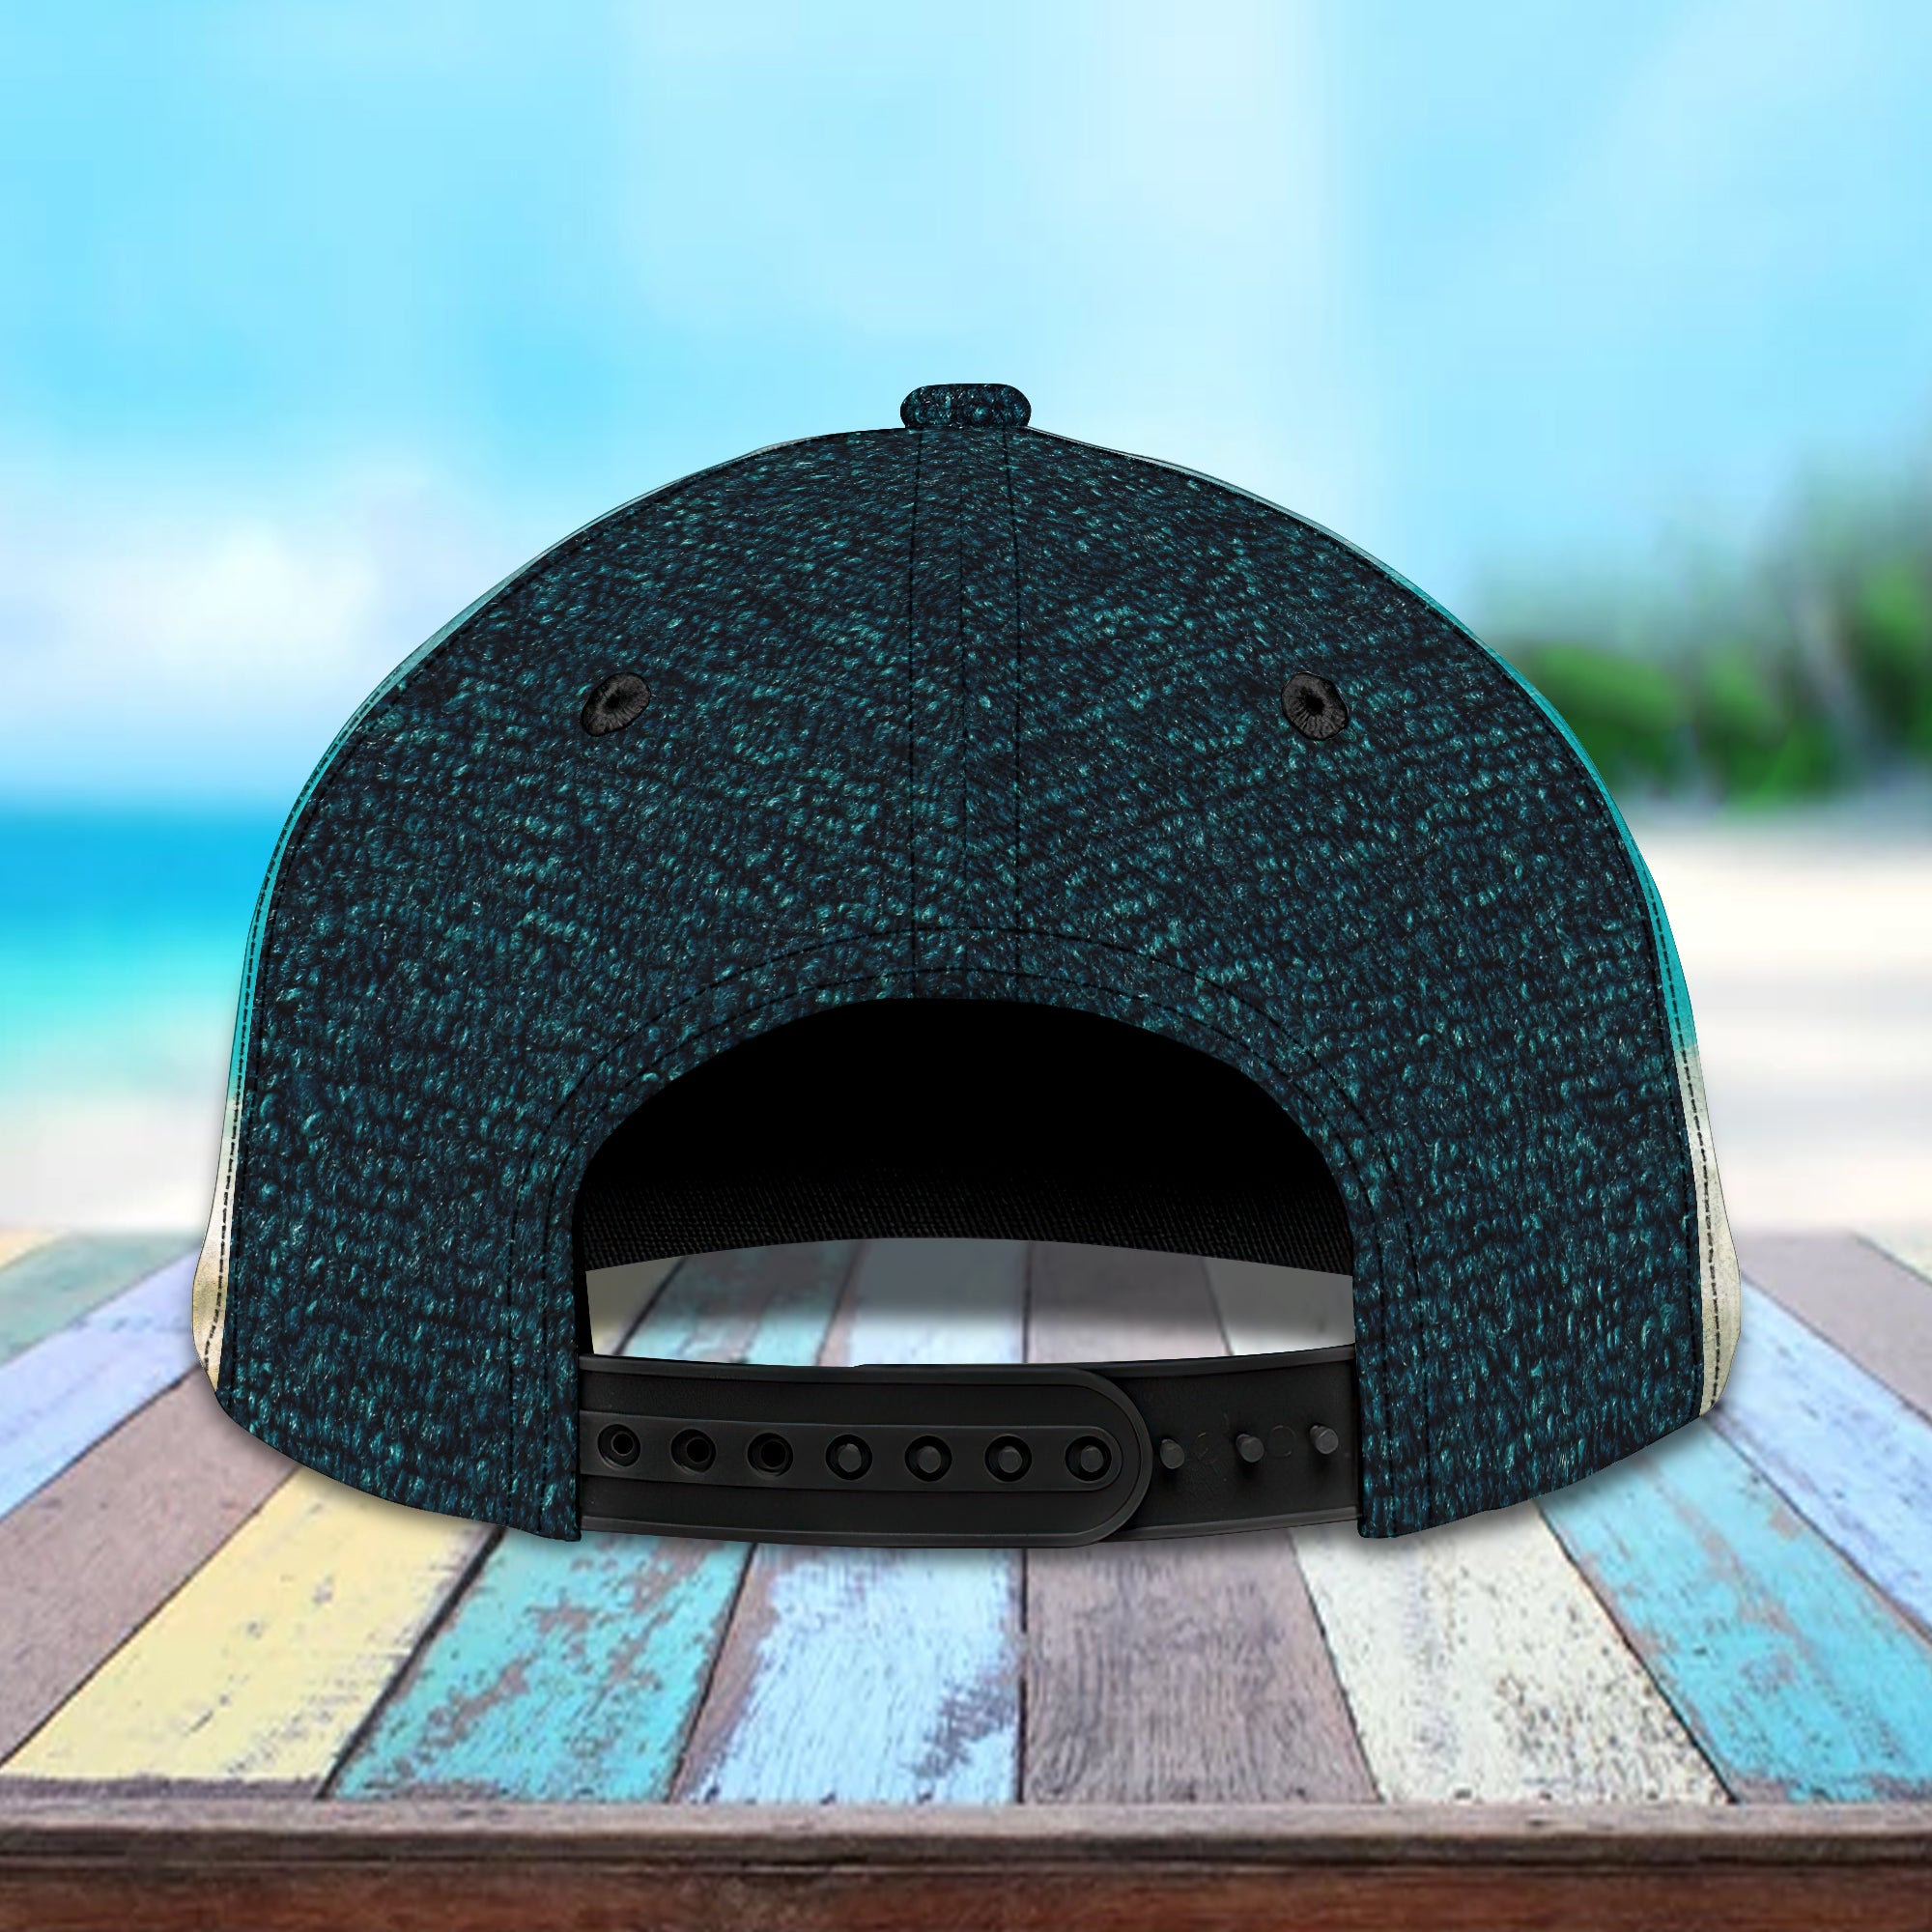 Turtle 01 - Personalized Name Cap - Pth98